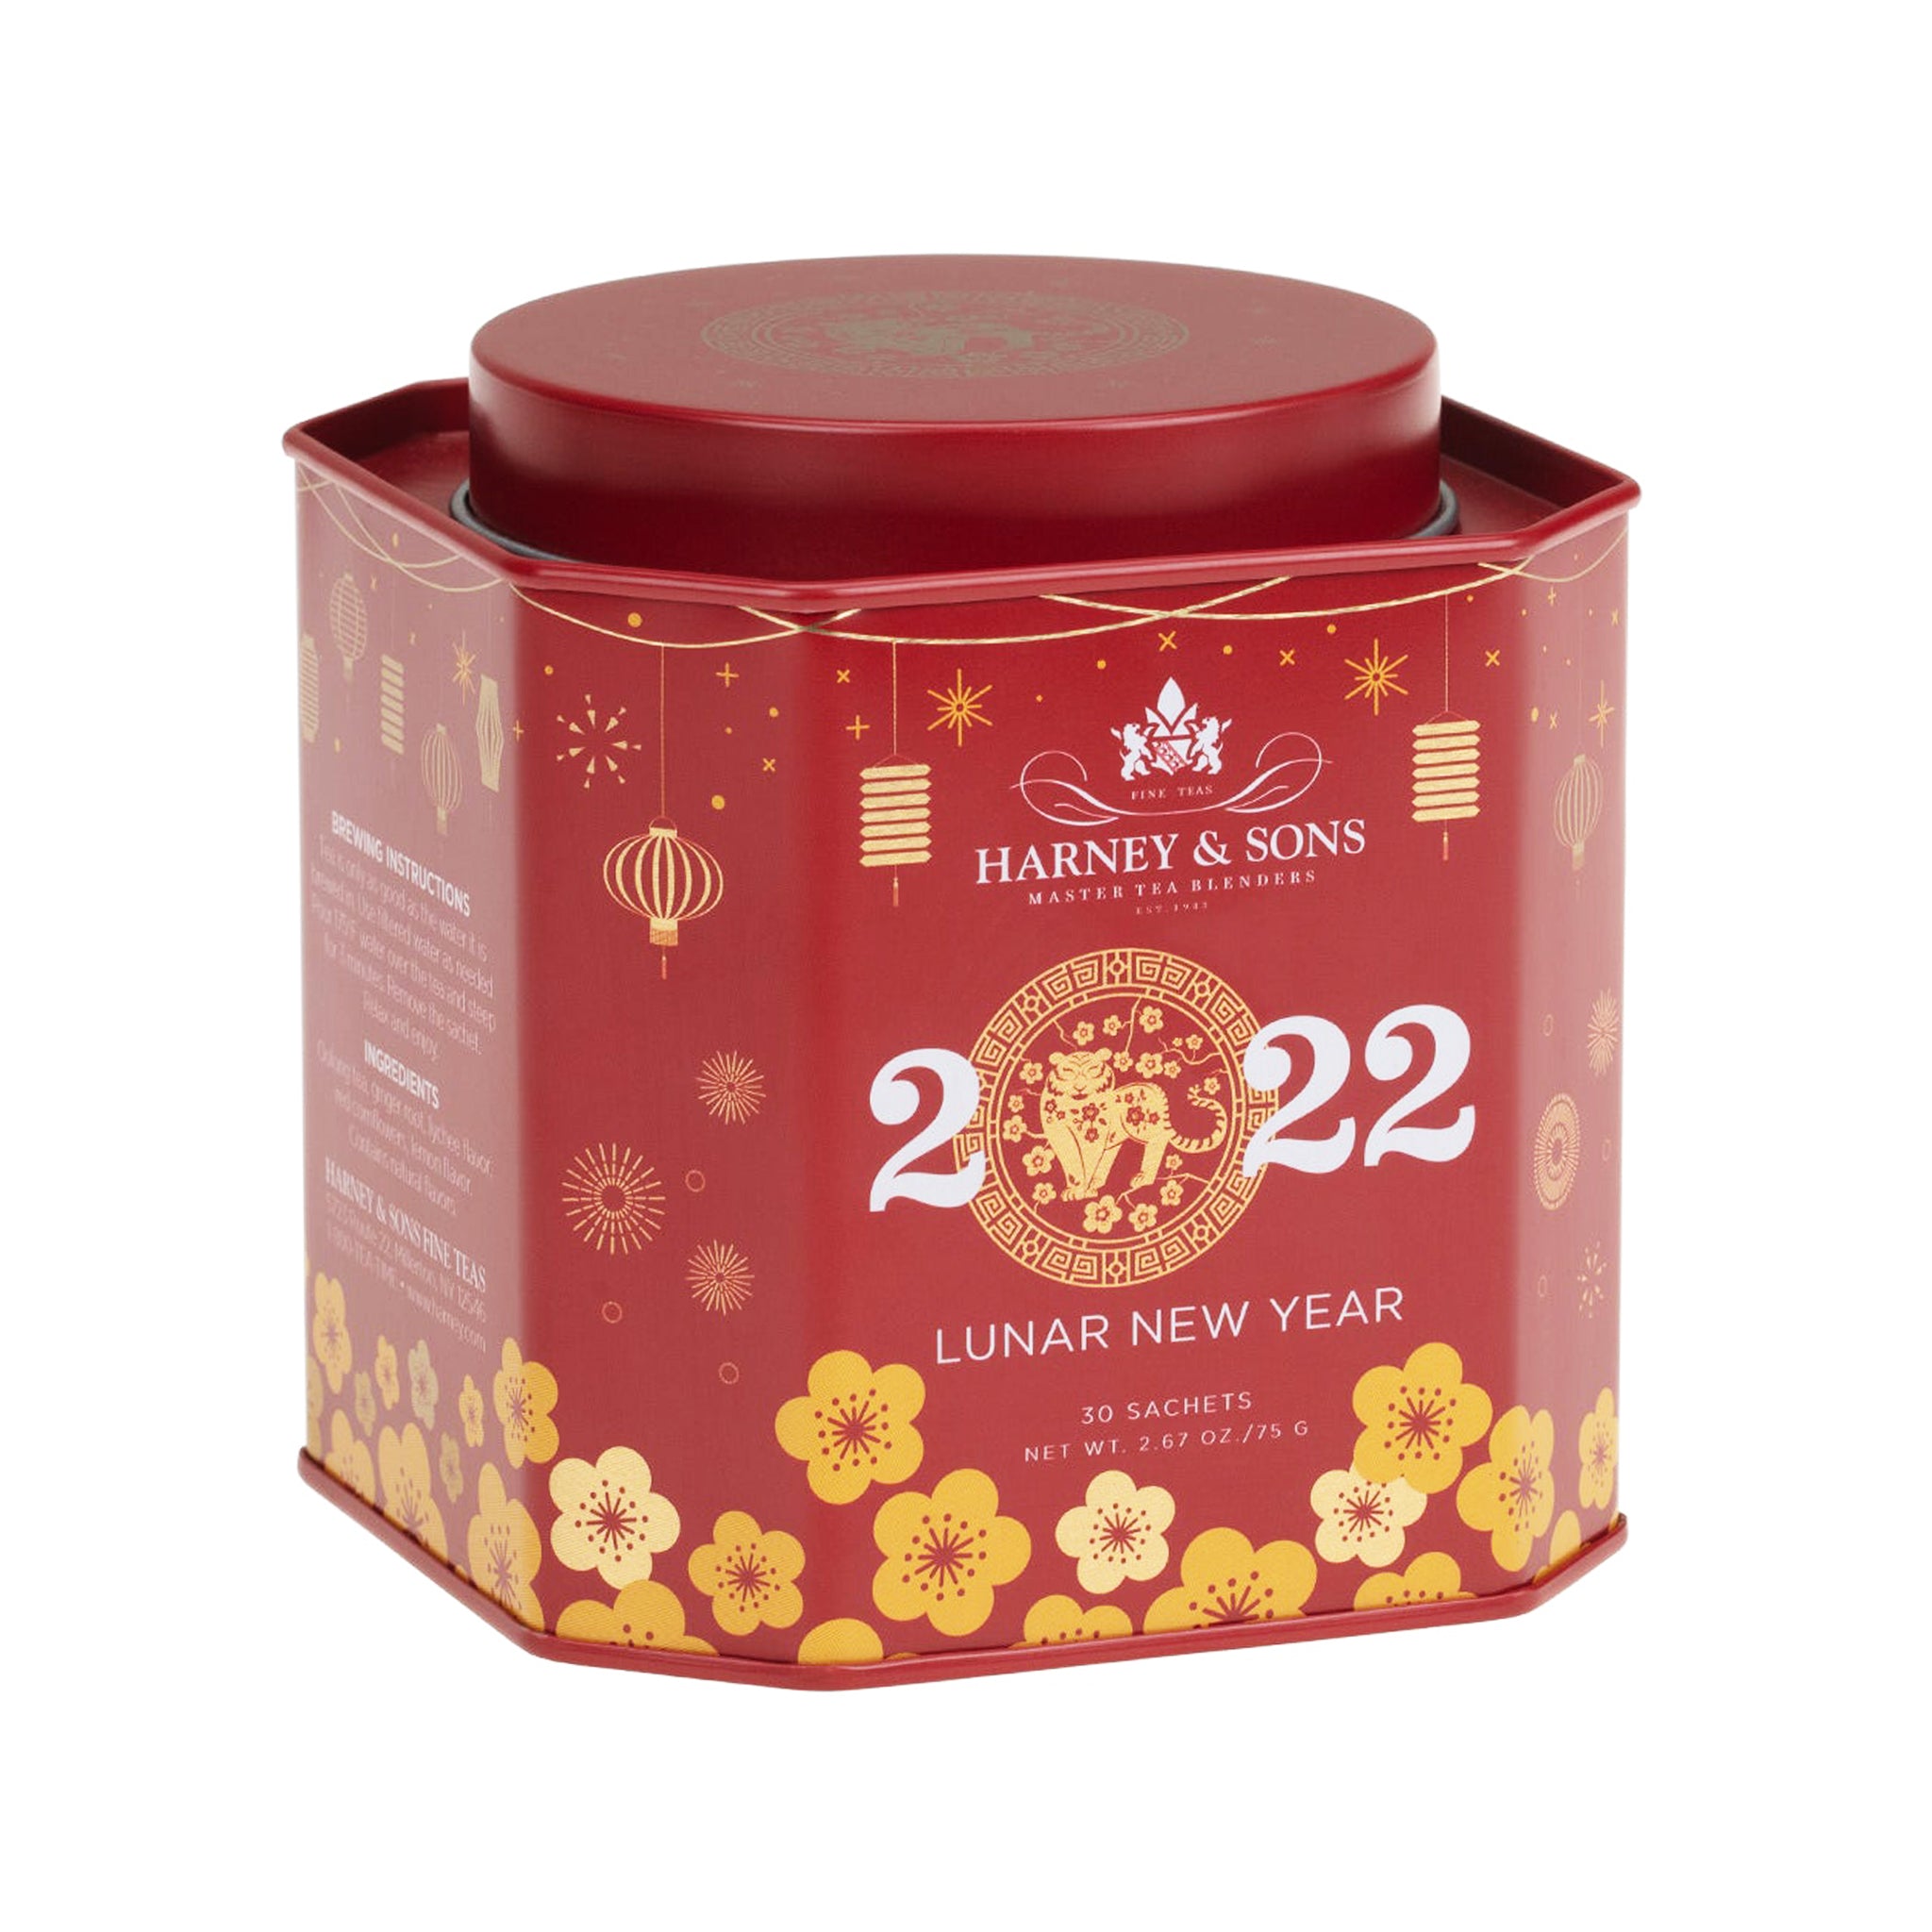 [Limited Edition] Lunar New Year Tea 2022 - Year of the Tiger